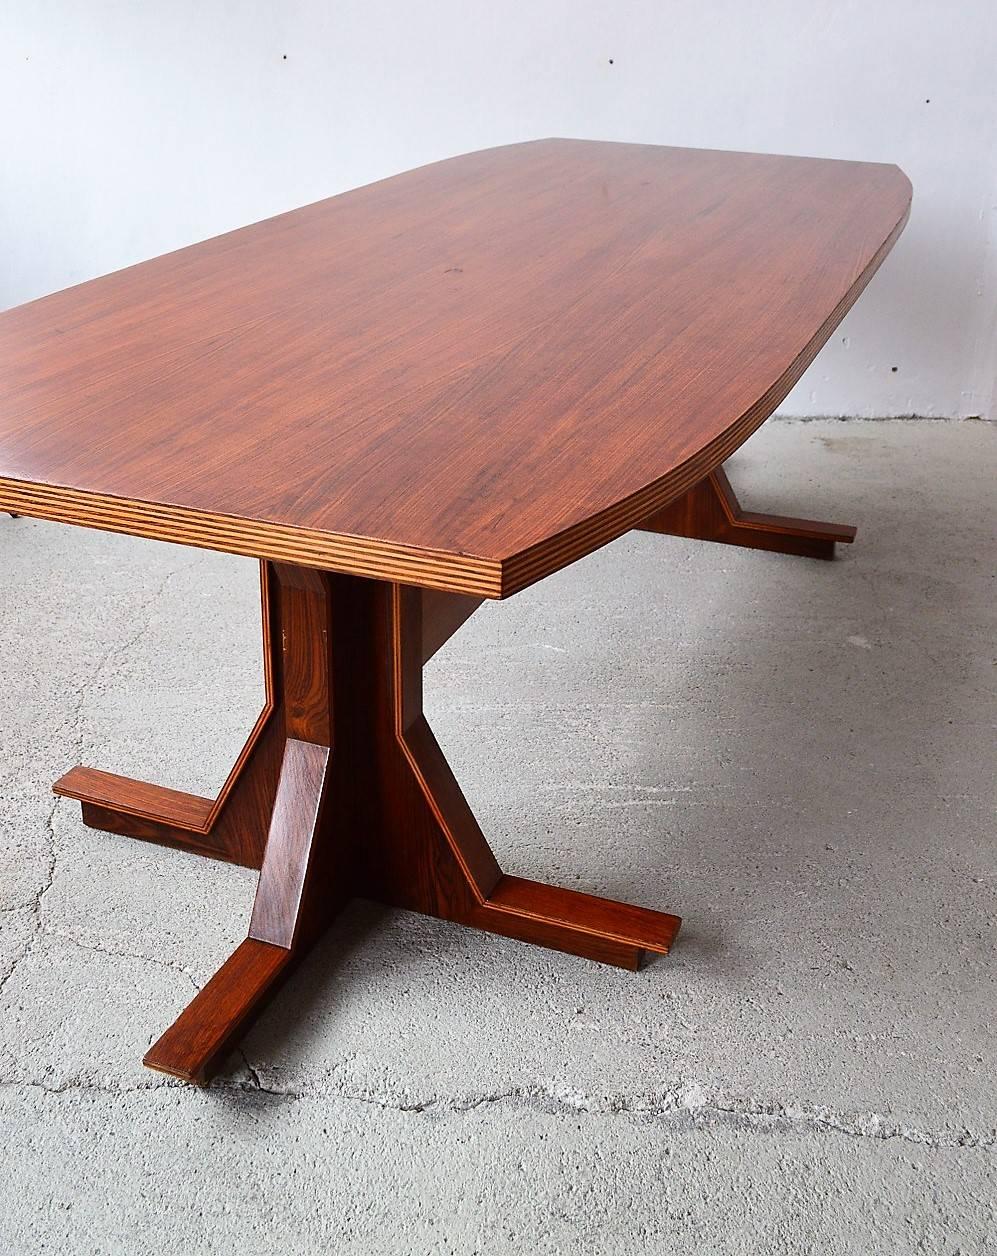 Mid-20th Century Italian Midcentury Dining or Conference Table, 1950s For Sale